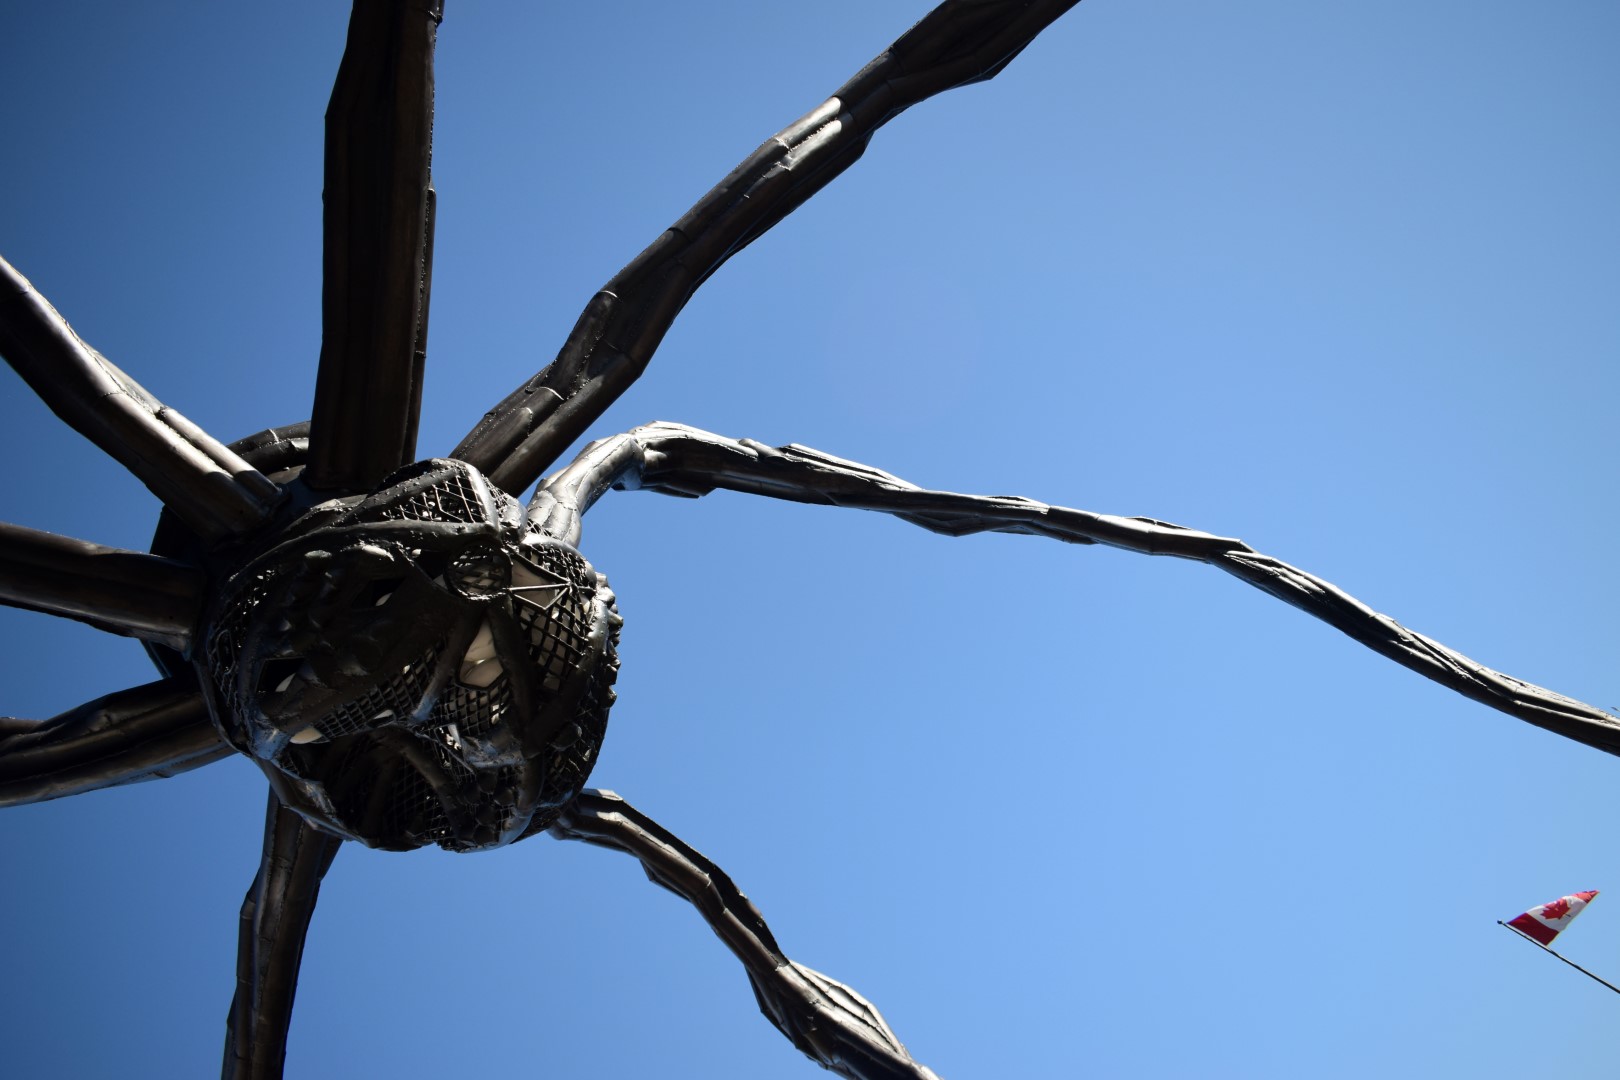 The Maman statue, National Gallery of Canada, Sussex Dr, Ottawa